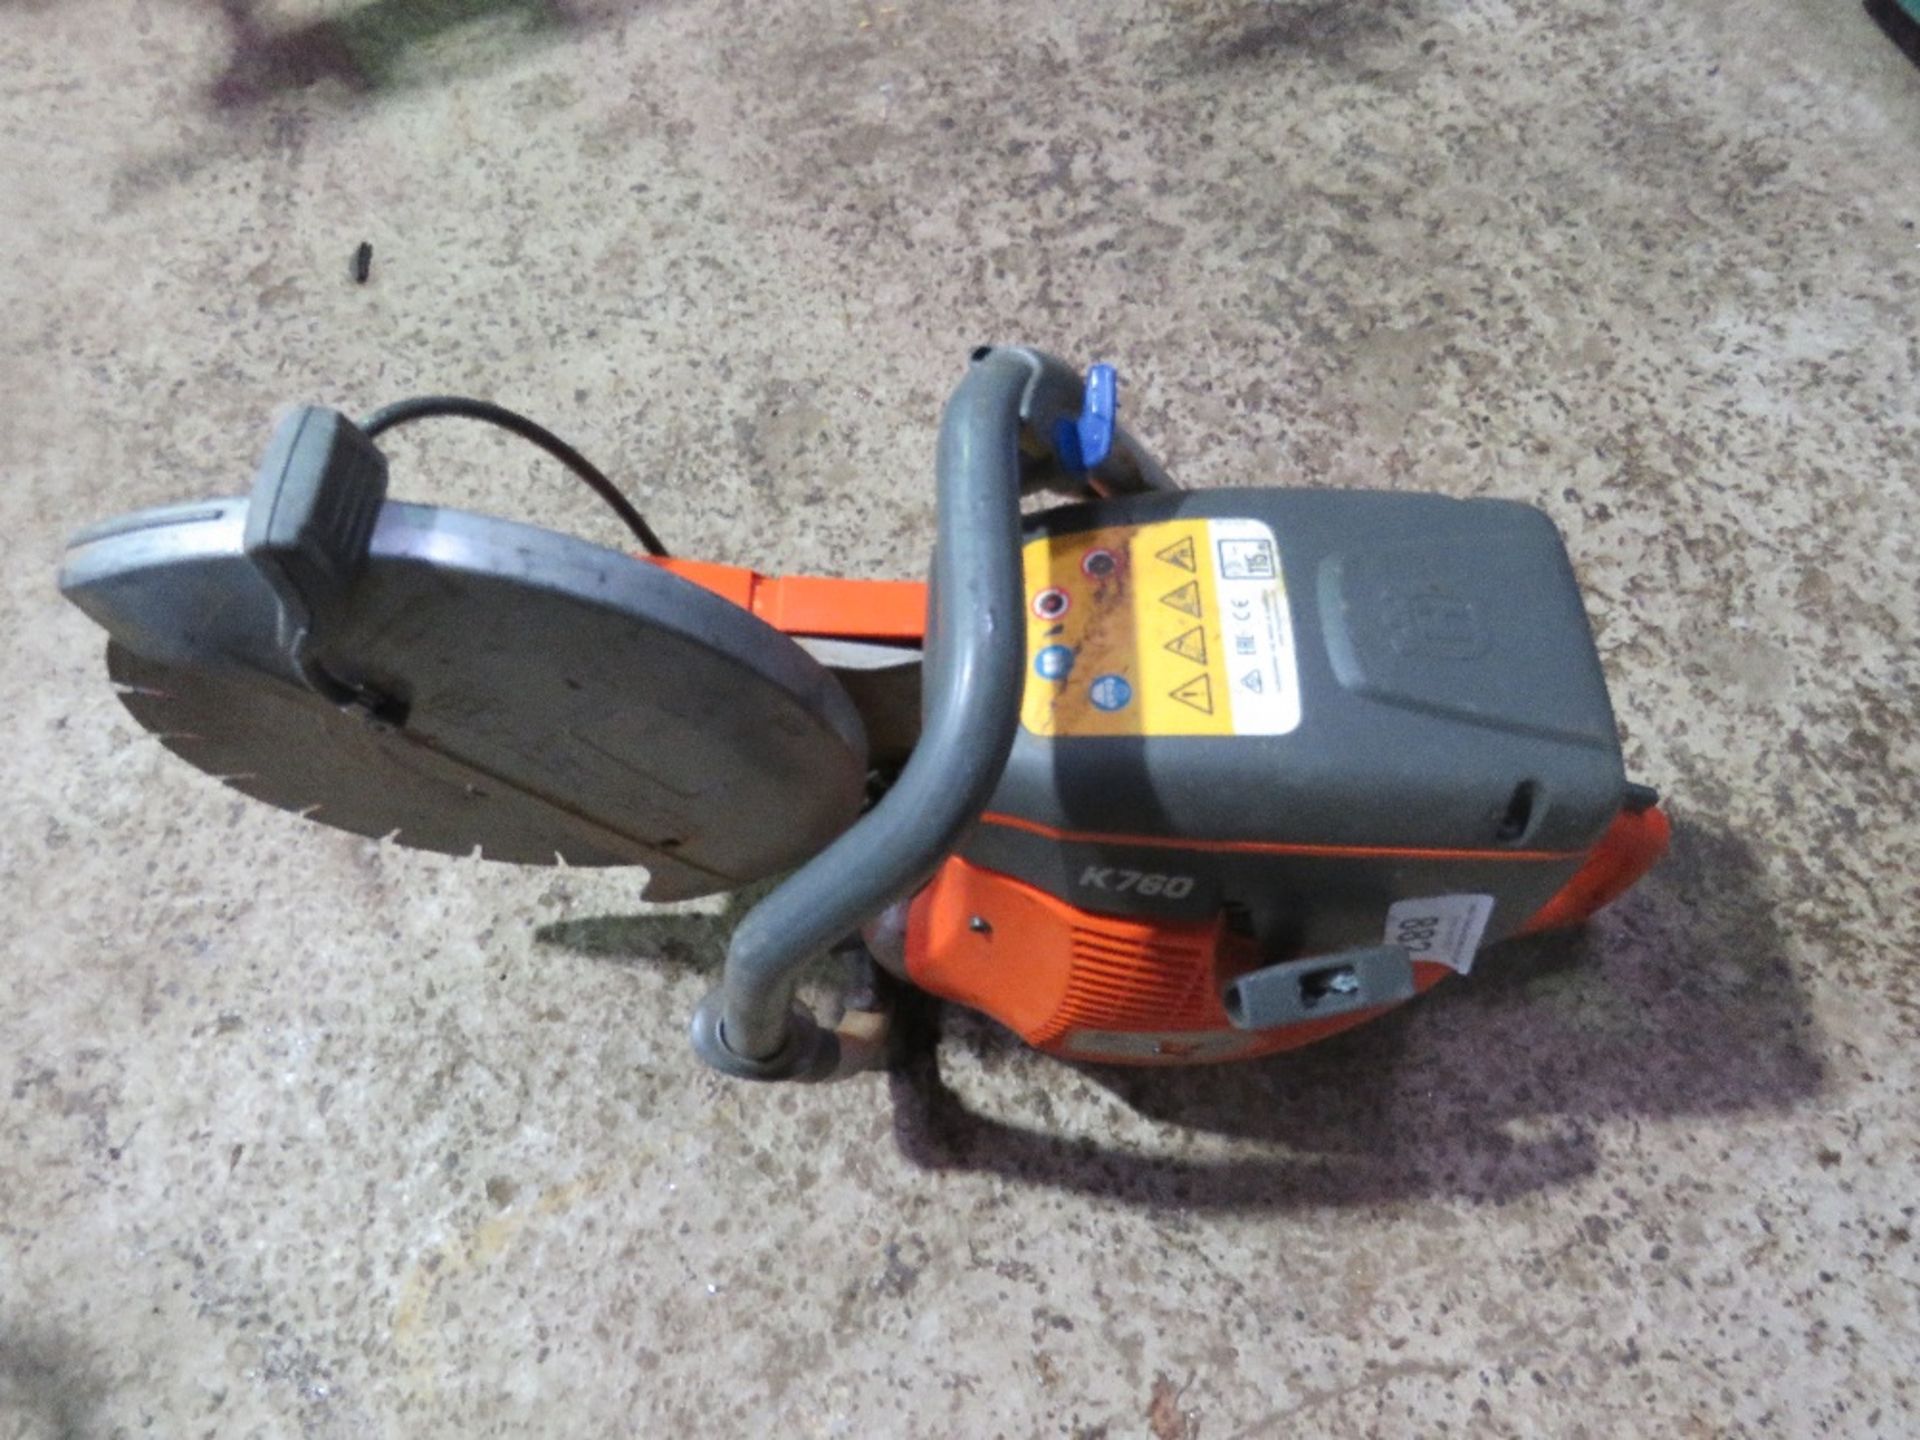 HUSQVARNA K760 PETROL ENGINED CUT OFF SAW WITH A BLADE. THIS LOT IS SOLD UNDER THE AUCTIONEERS MA - Image 4 of 4